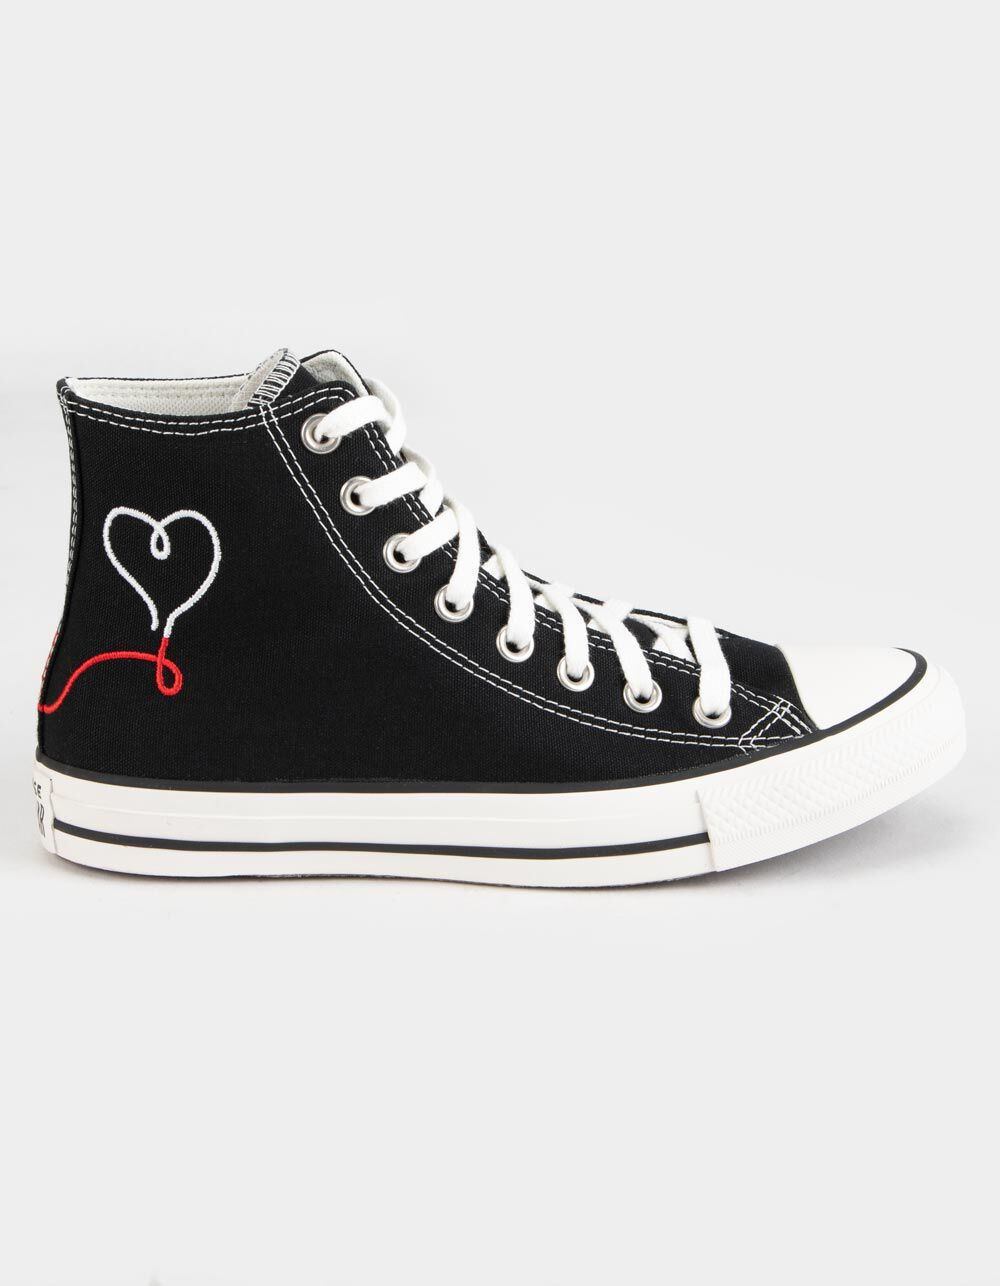 CONVERSE Chuck Taylor All Star Love High Top Shoes - BLACK/VINTAGE ...